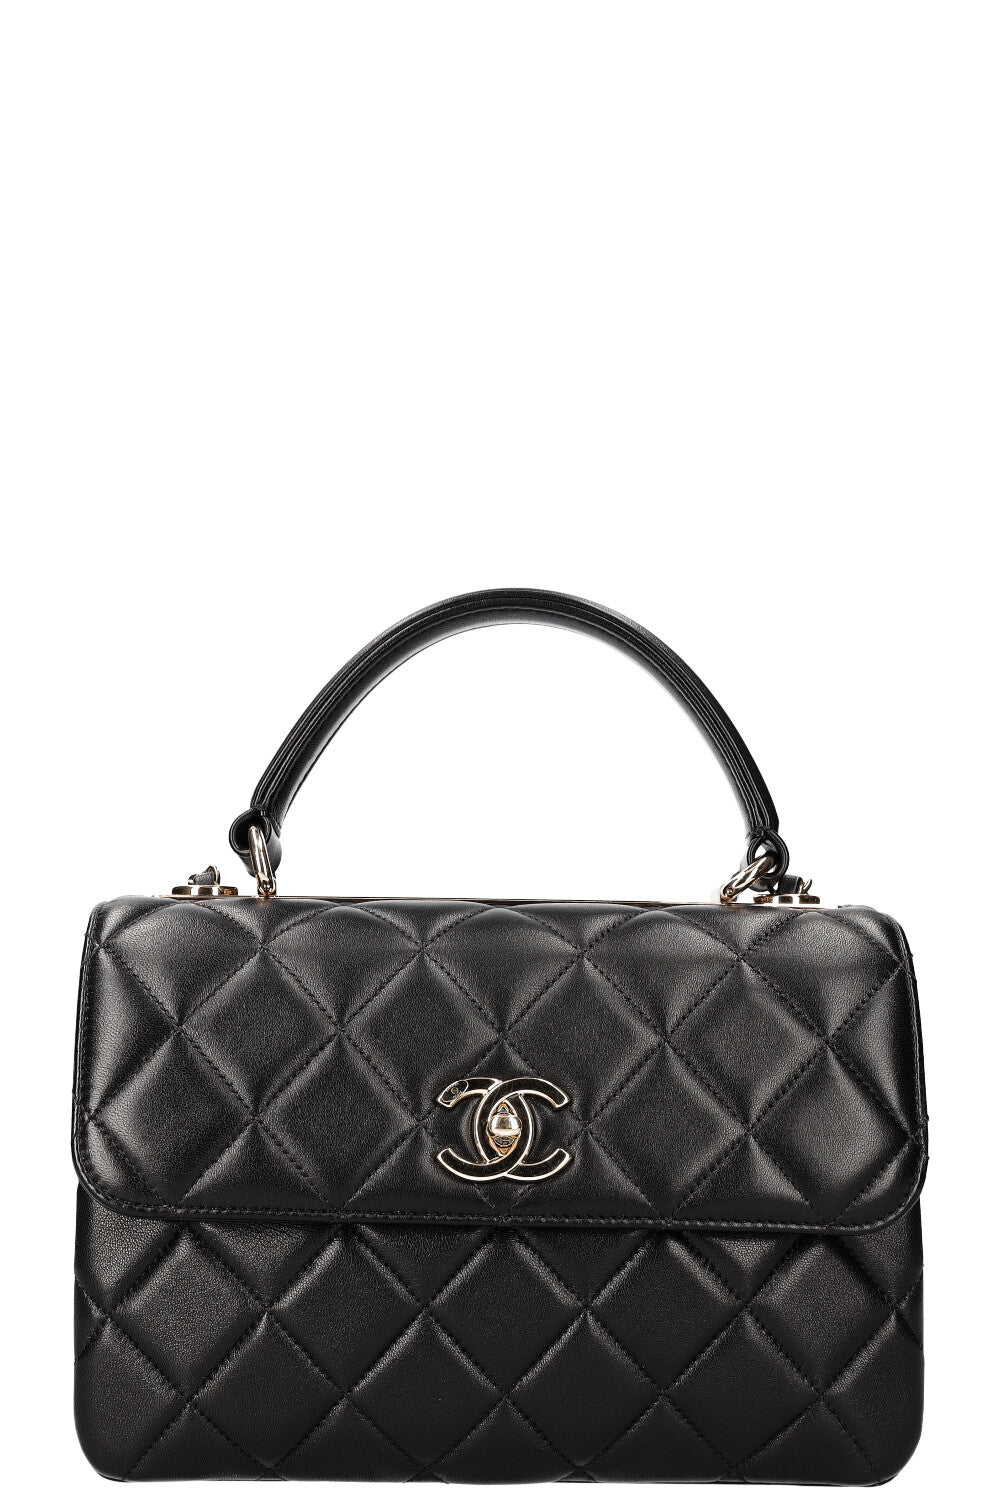 CHANEL Trendy Bag Quilted Black